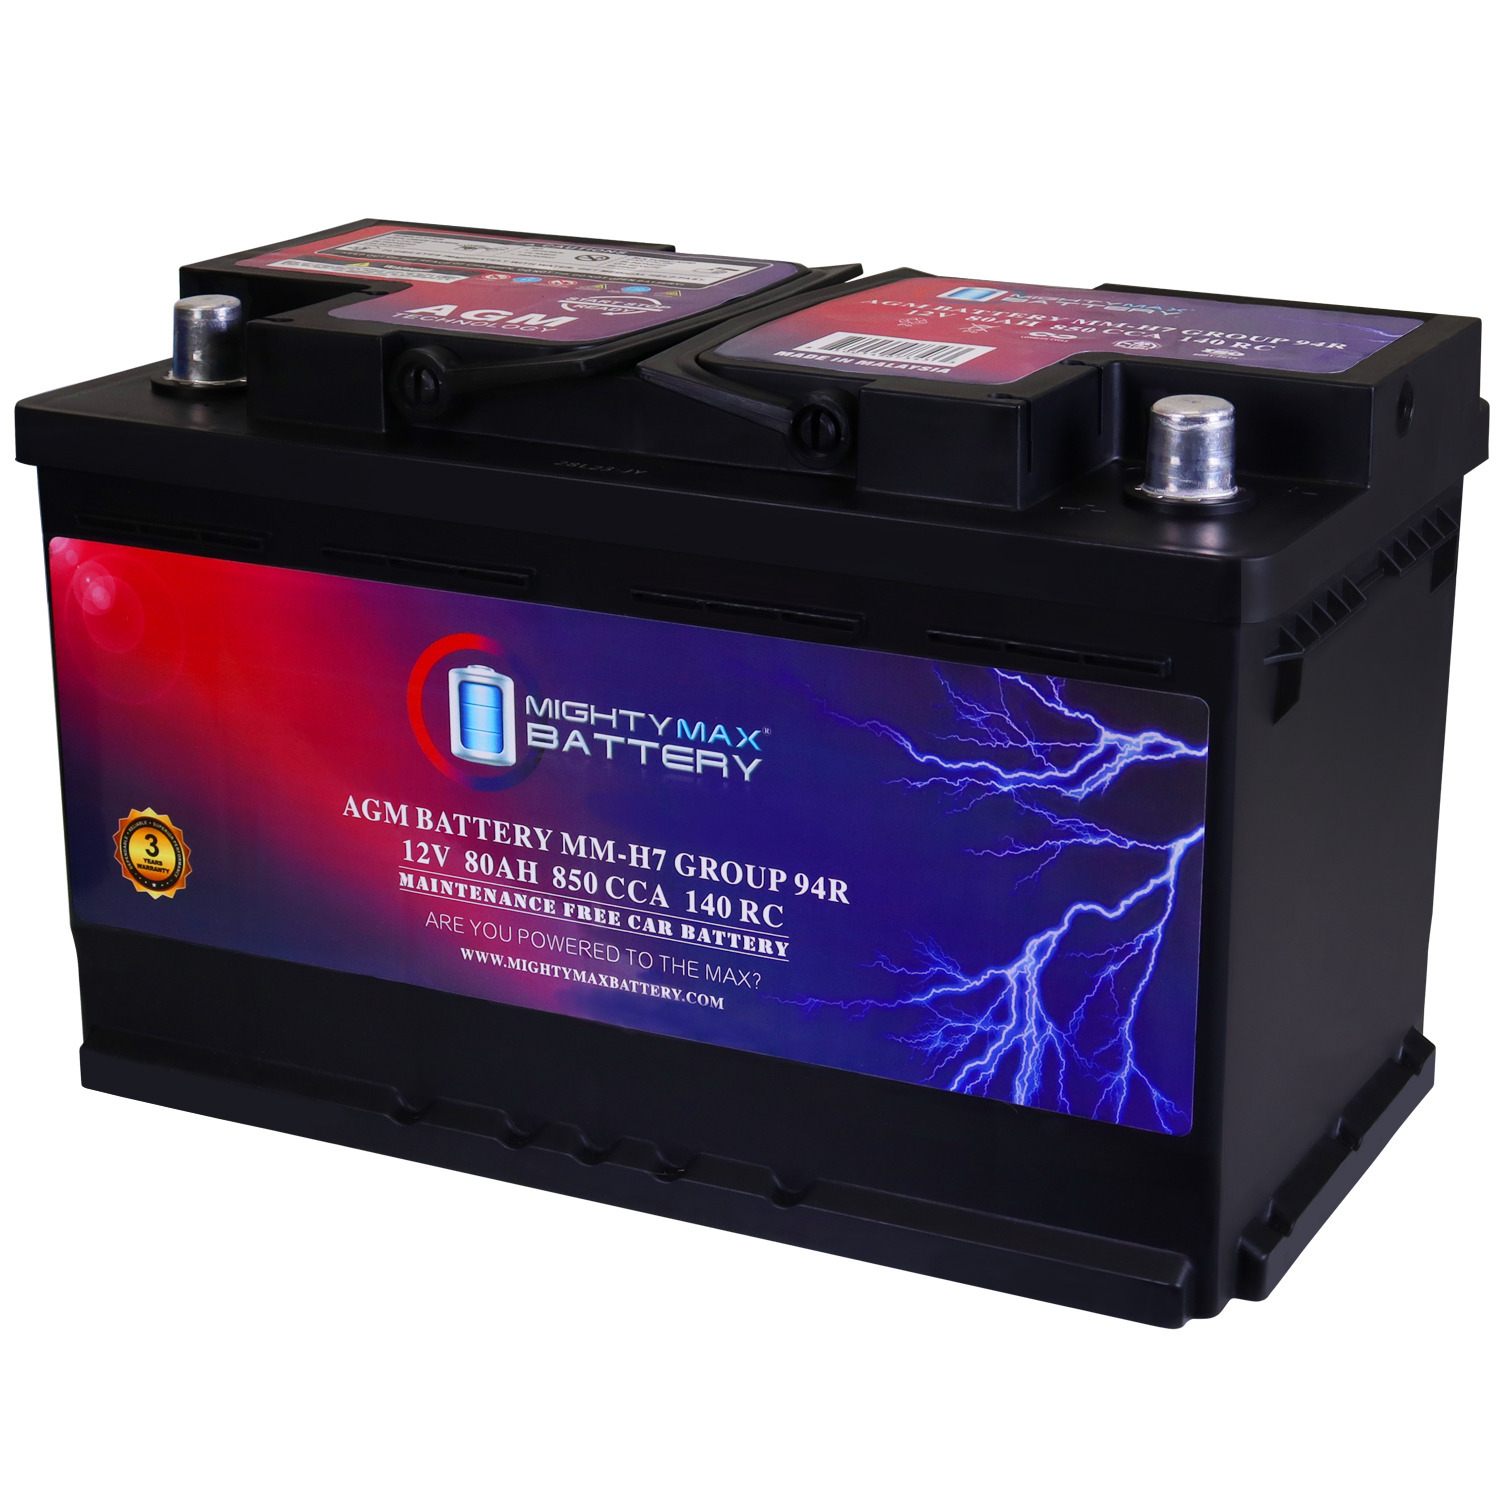 MM-H7 Group 94R 12V 80AH 140RC 850 CCA Replacement Battery Compatible with Chrysler Pacifica 17-21